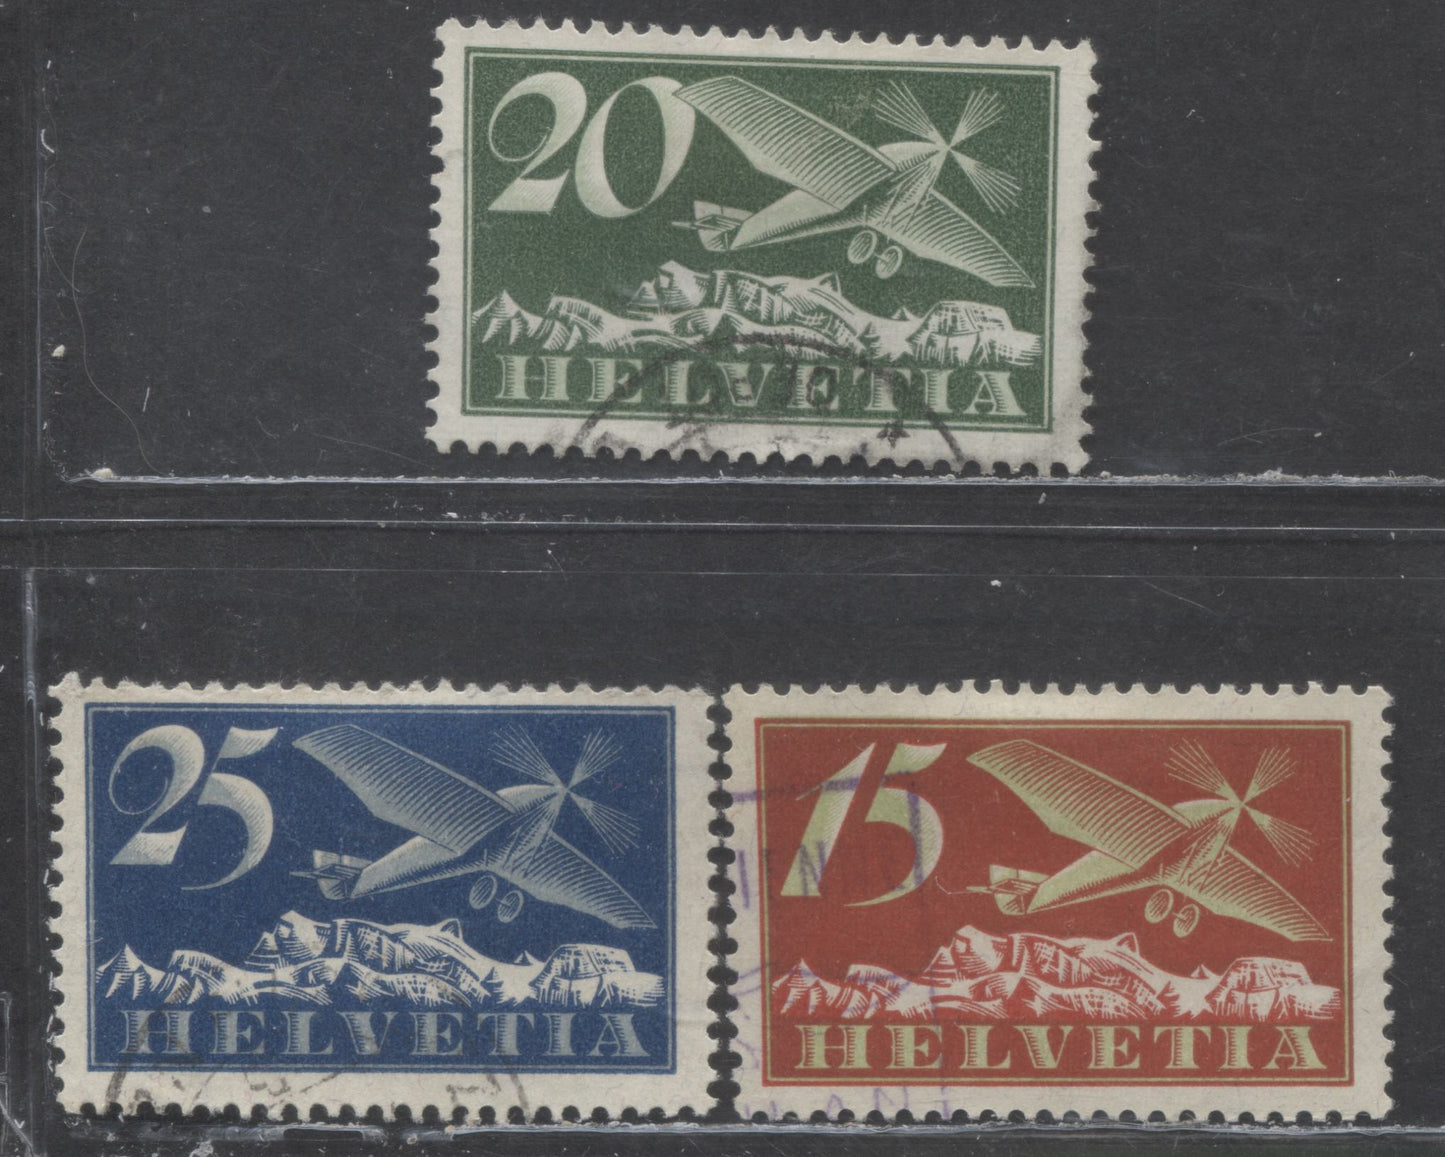 Lot 315 Switzerland SC#C3-C5 1923-1925 Airmails, 3 Fine/Very Fine Used Singles, Click on Listing to See ALL Pictures, 2022 Scott Classic Cat. $26.25 USD